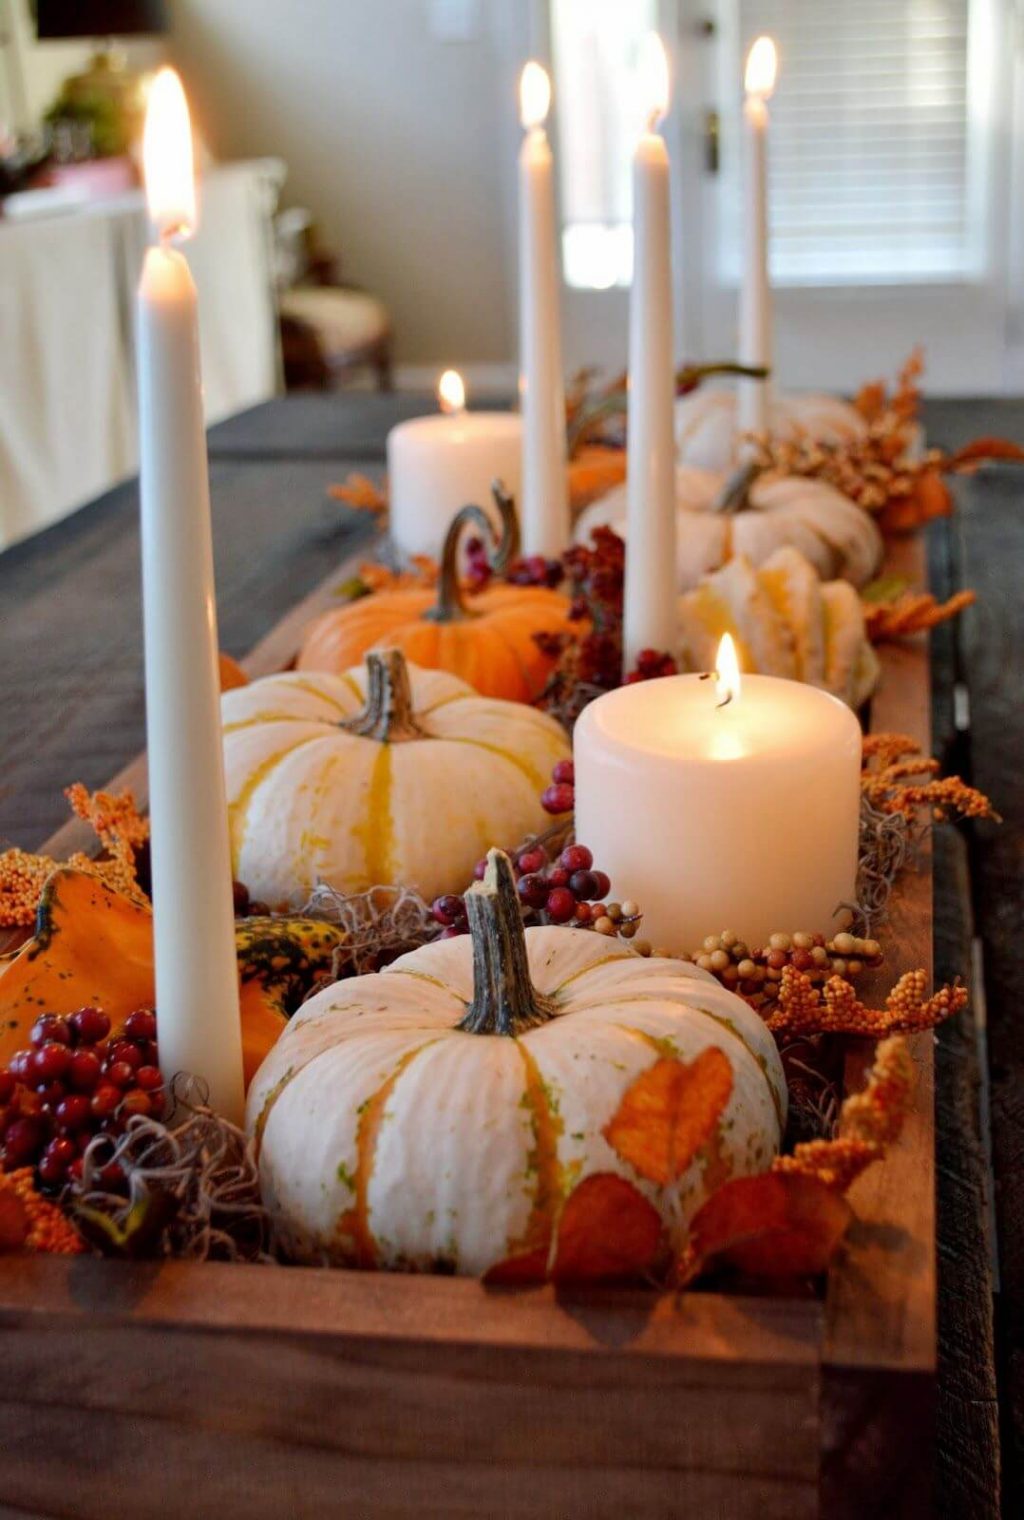 Candles for thanksgiving dinner decoration ideas